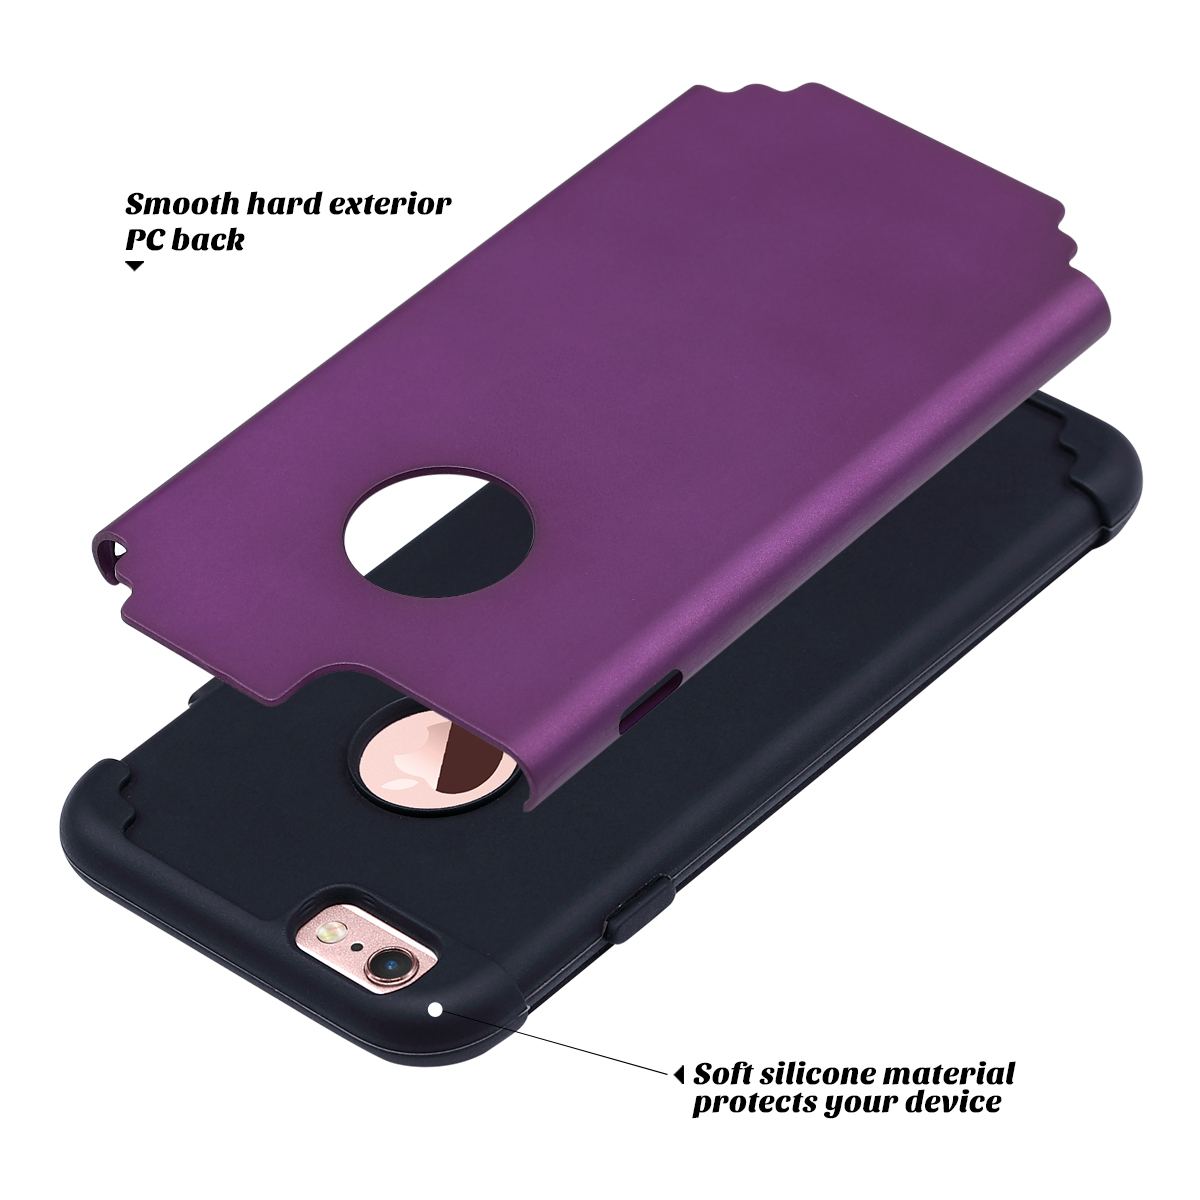 ULAK iPhone 6 Case, iPhone 6S Case, Slim Dual Layer Shockproof Bumper Phone Case for Apple iPhone 6 / 6s for Girls Women, Dark Purple Black - image 2 of 7